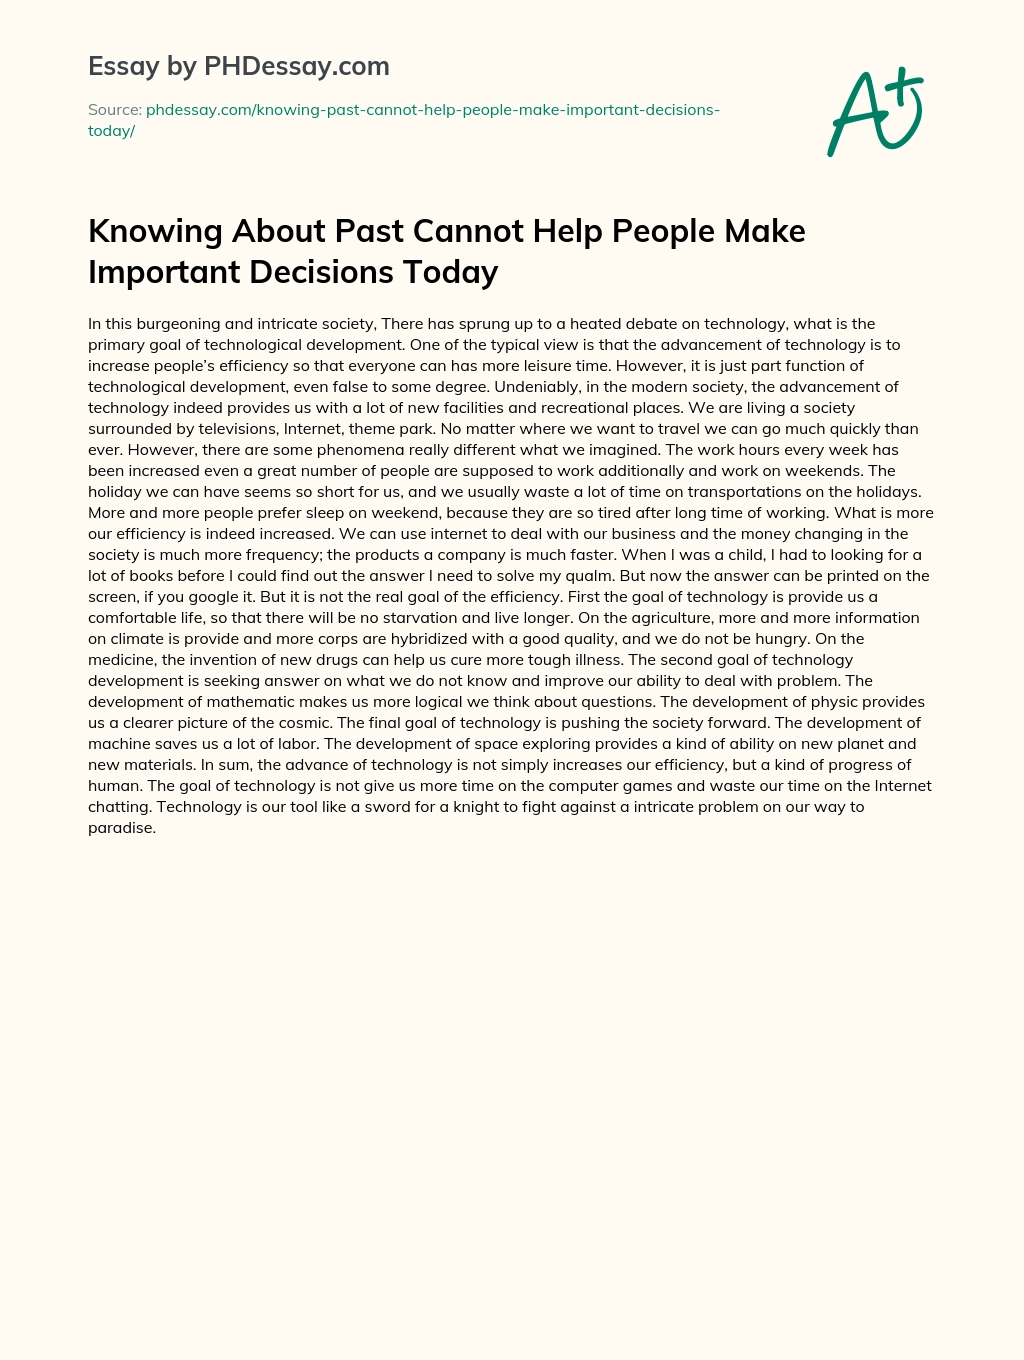 Knowing About Past Cannot Help People Make Important Decisions Today essay